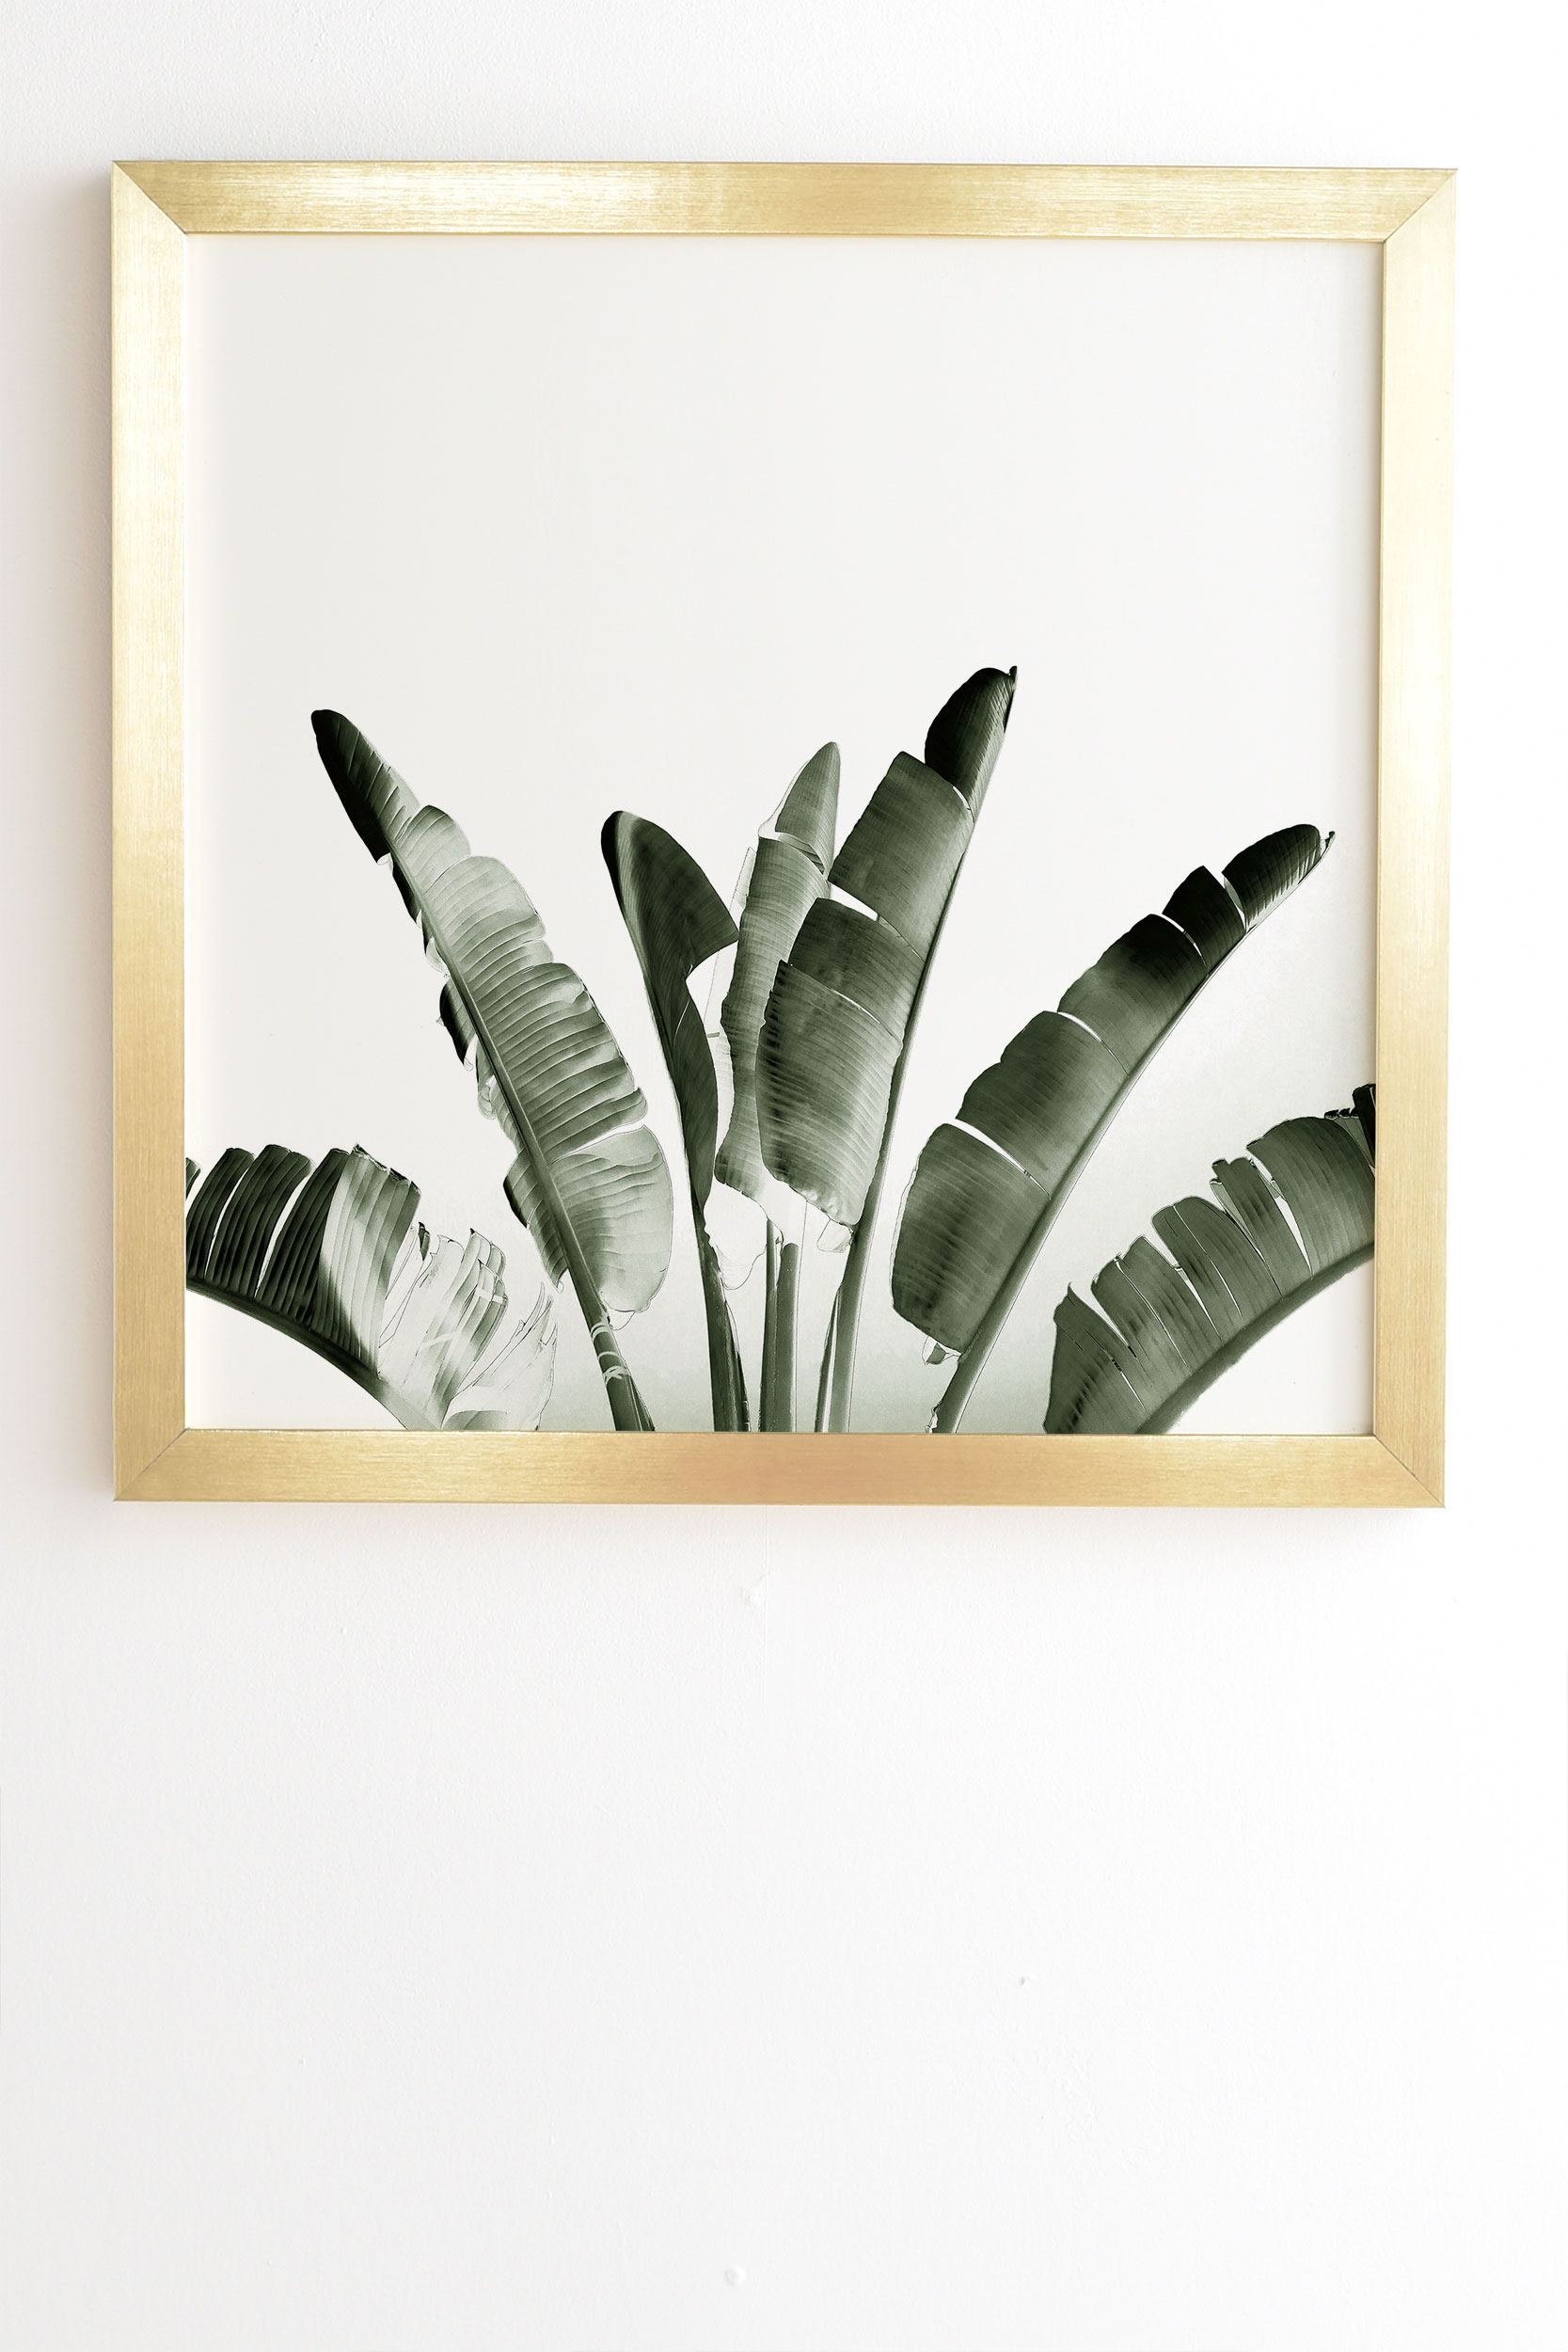 Traveler Palm by Gale Switzer - Framed Wall Art Basic Gold 20" x 20" - Image 1